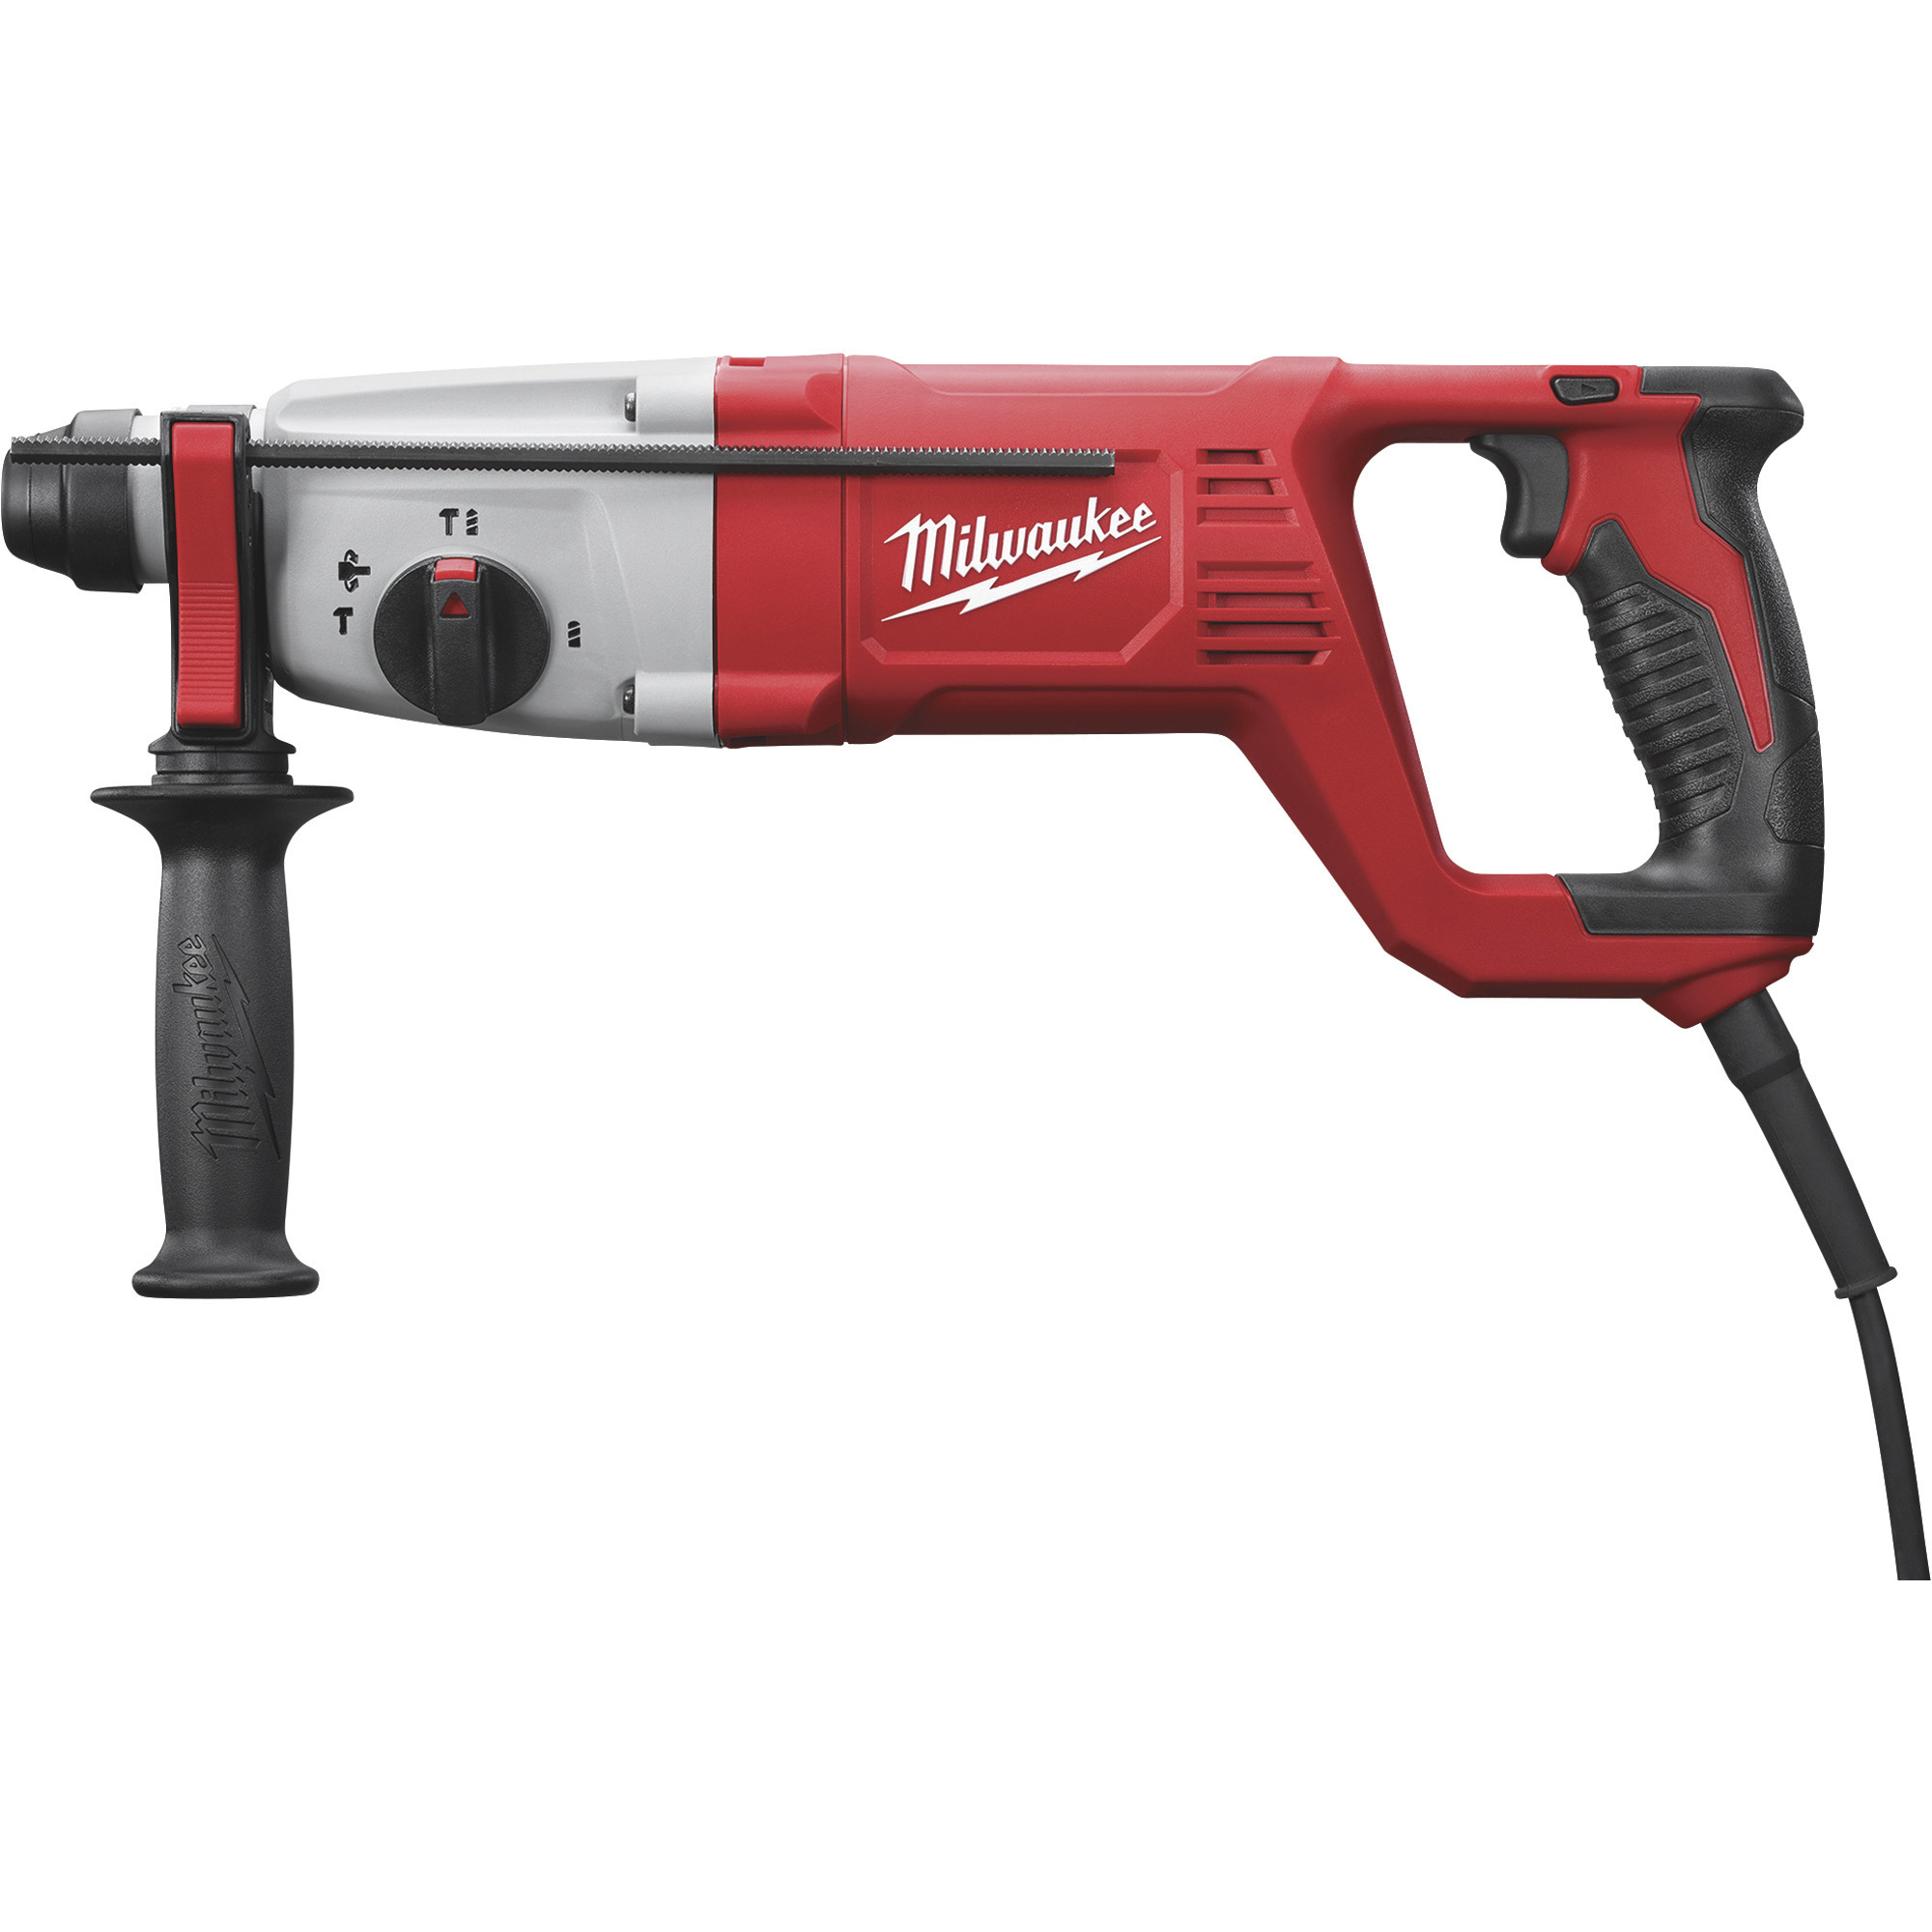 Milwaukee Corded SDS+ D-Handle Rotary Hammer Drill 1Inch, 5,860 BPM, 8.0 Amp, Model 5262-21